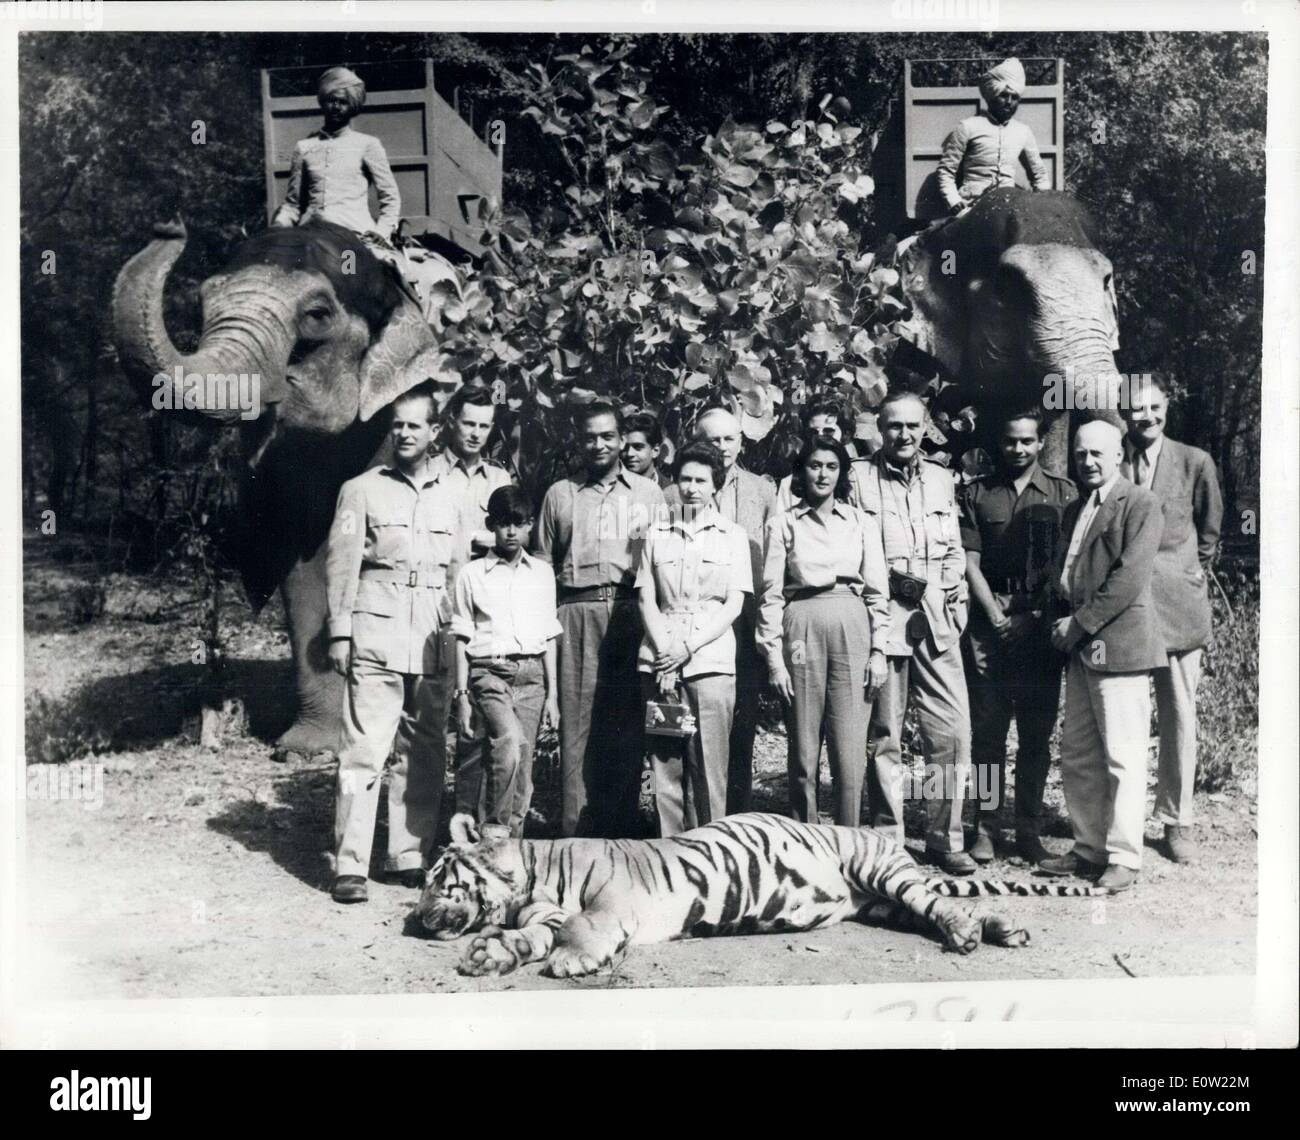 Jan. 25, 1961 - Royal Indian Tour Duke of Edinburgh Shoots a Tiger in the Rajasthan Jungle: Queen Elizabeth II in centre, wearing slacks and holding a cine camera stands behind the tiger which her husband Prince Philip (left) shot yesterday in the Rajasthan Jungle, near Jaipur, India. Either side of the Queen stands the Maharaja and Maharanee of Jaipur who hosted at the hunt. The Queen watched from a Persian carpeted tree-top platform a her husband, twenty five yards away felled the 9ft. 8in. male tiger with a single shot through the hand Stock Photo